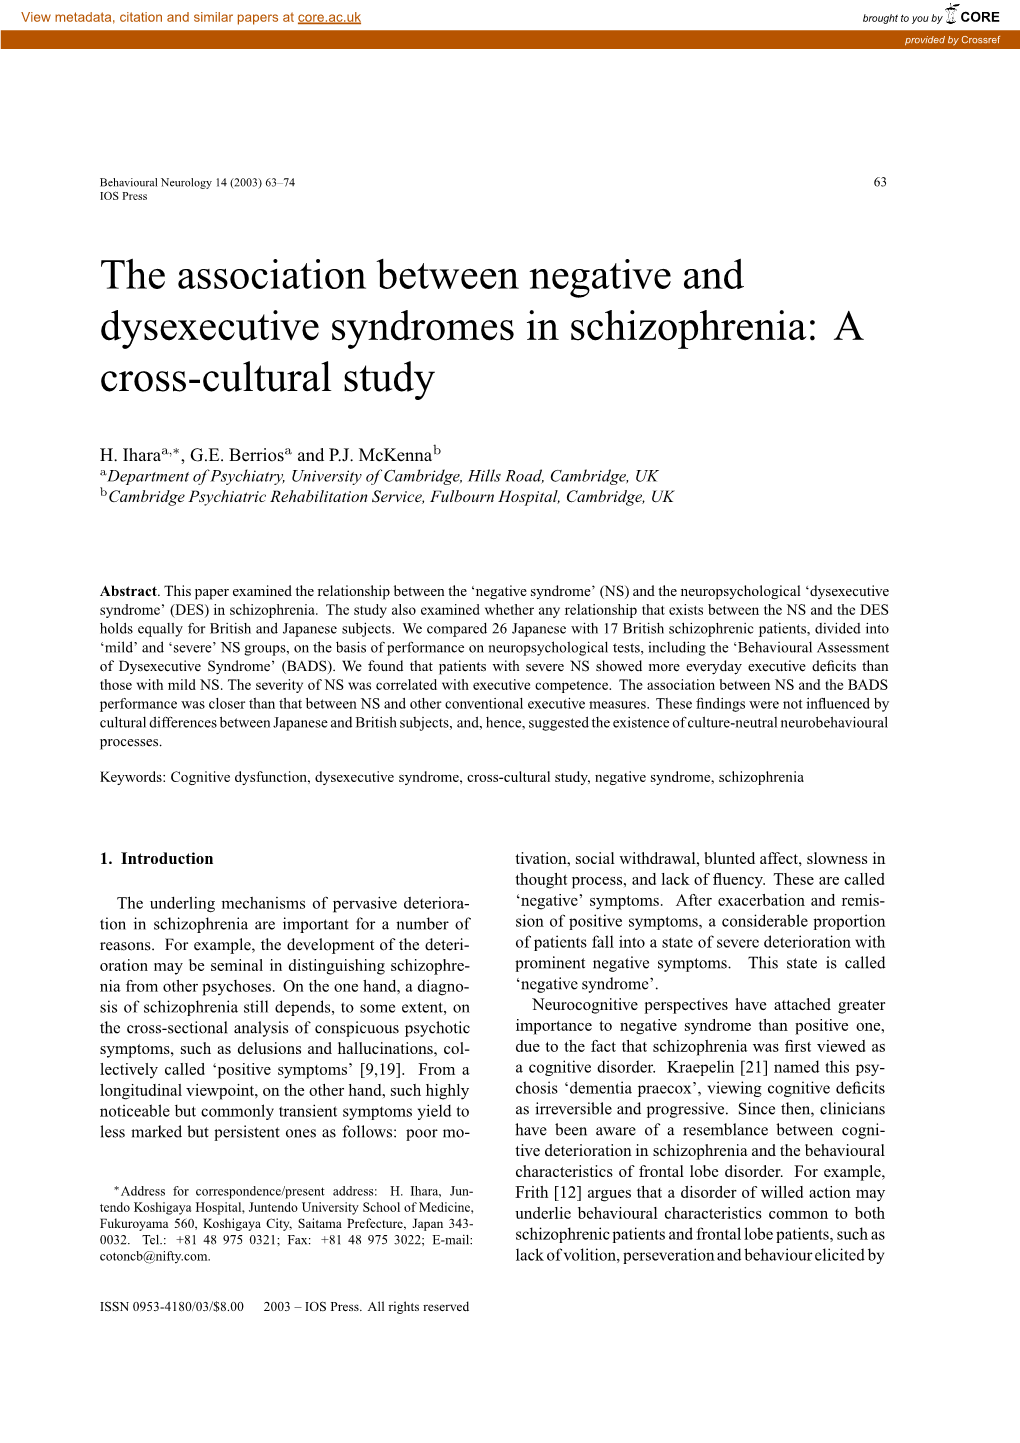 The Association Between Negative and Dysexecutive Syndromes in Schizophrenia: a Cross-Cultural Study